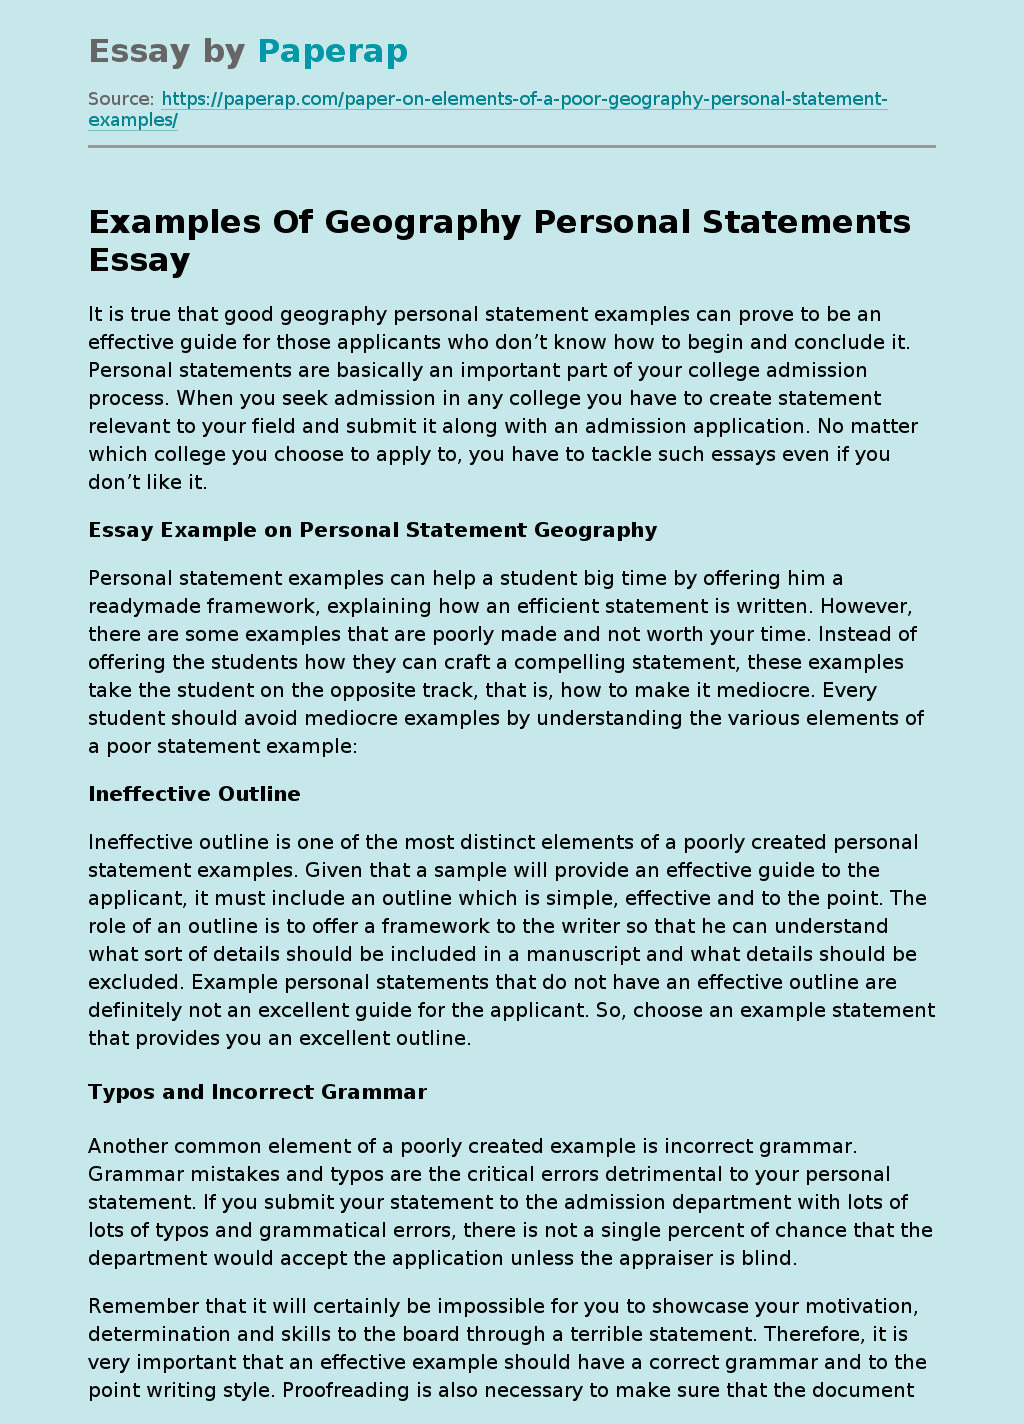 Examples Of Geography Personal Statements